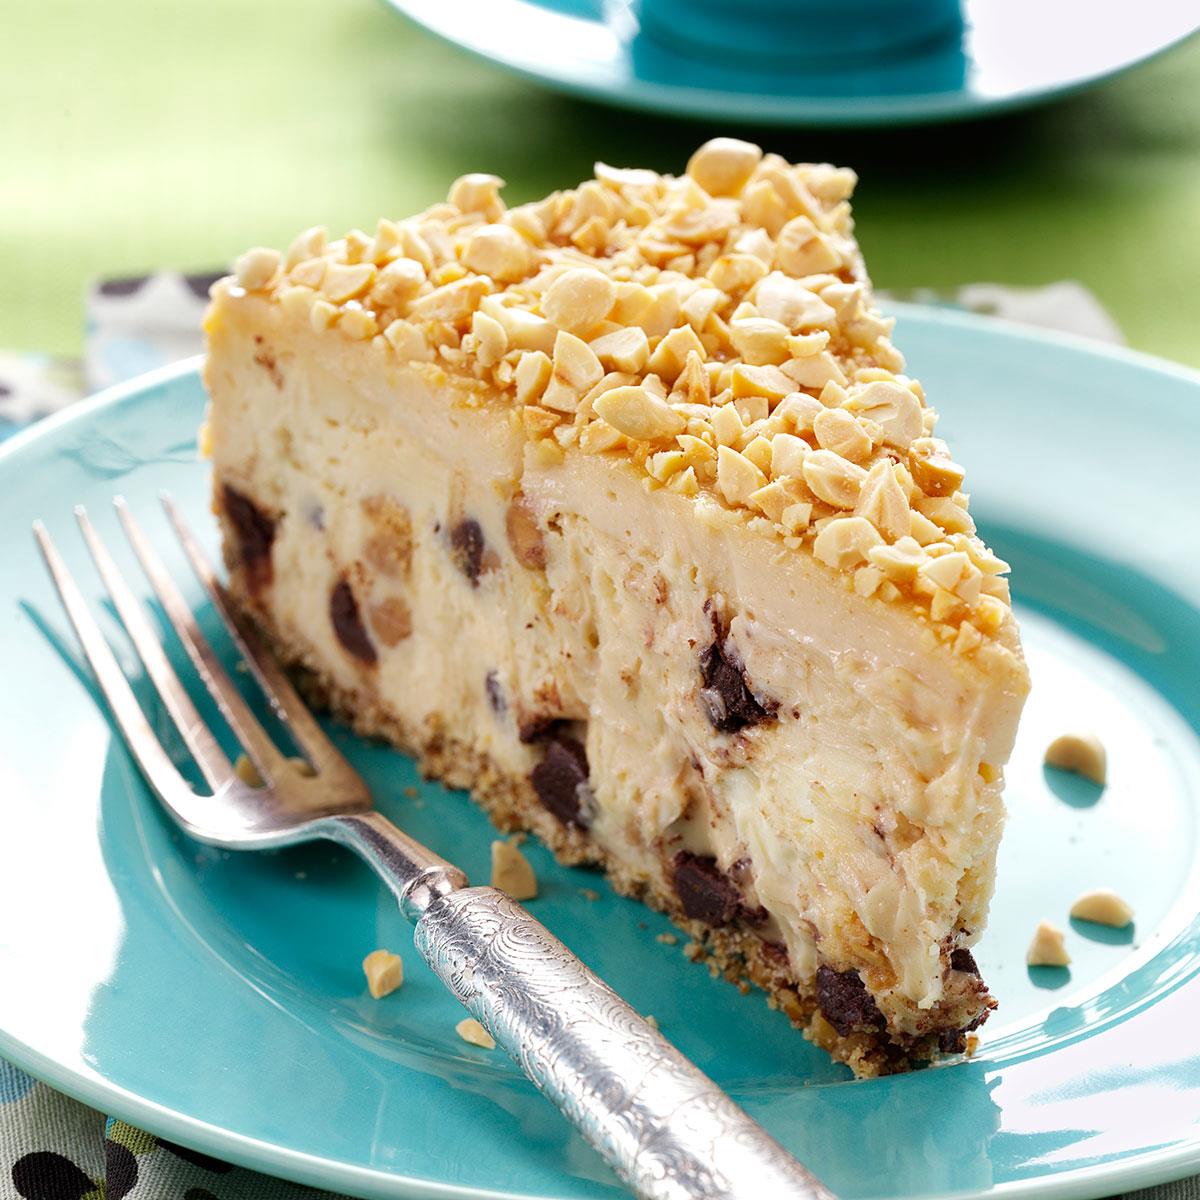 Peanut Butter Cheesecake image